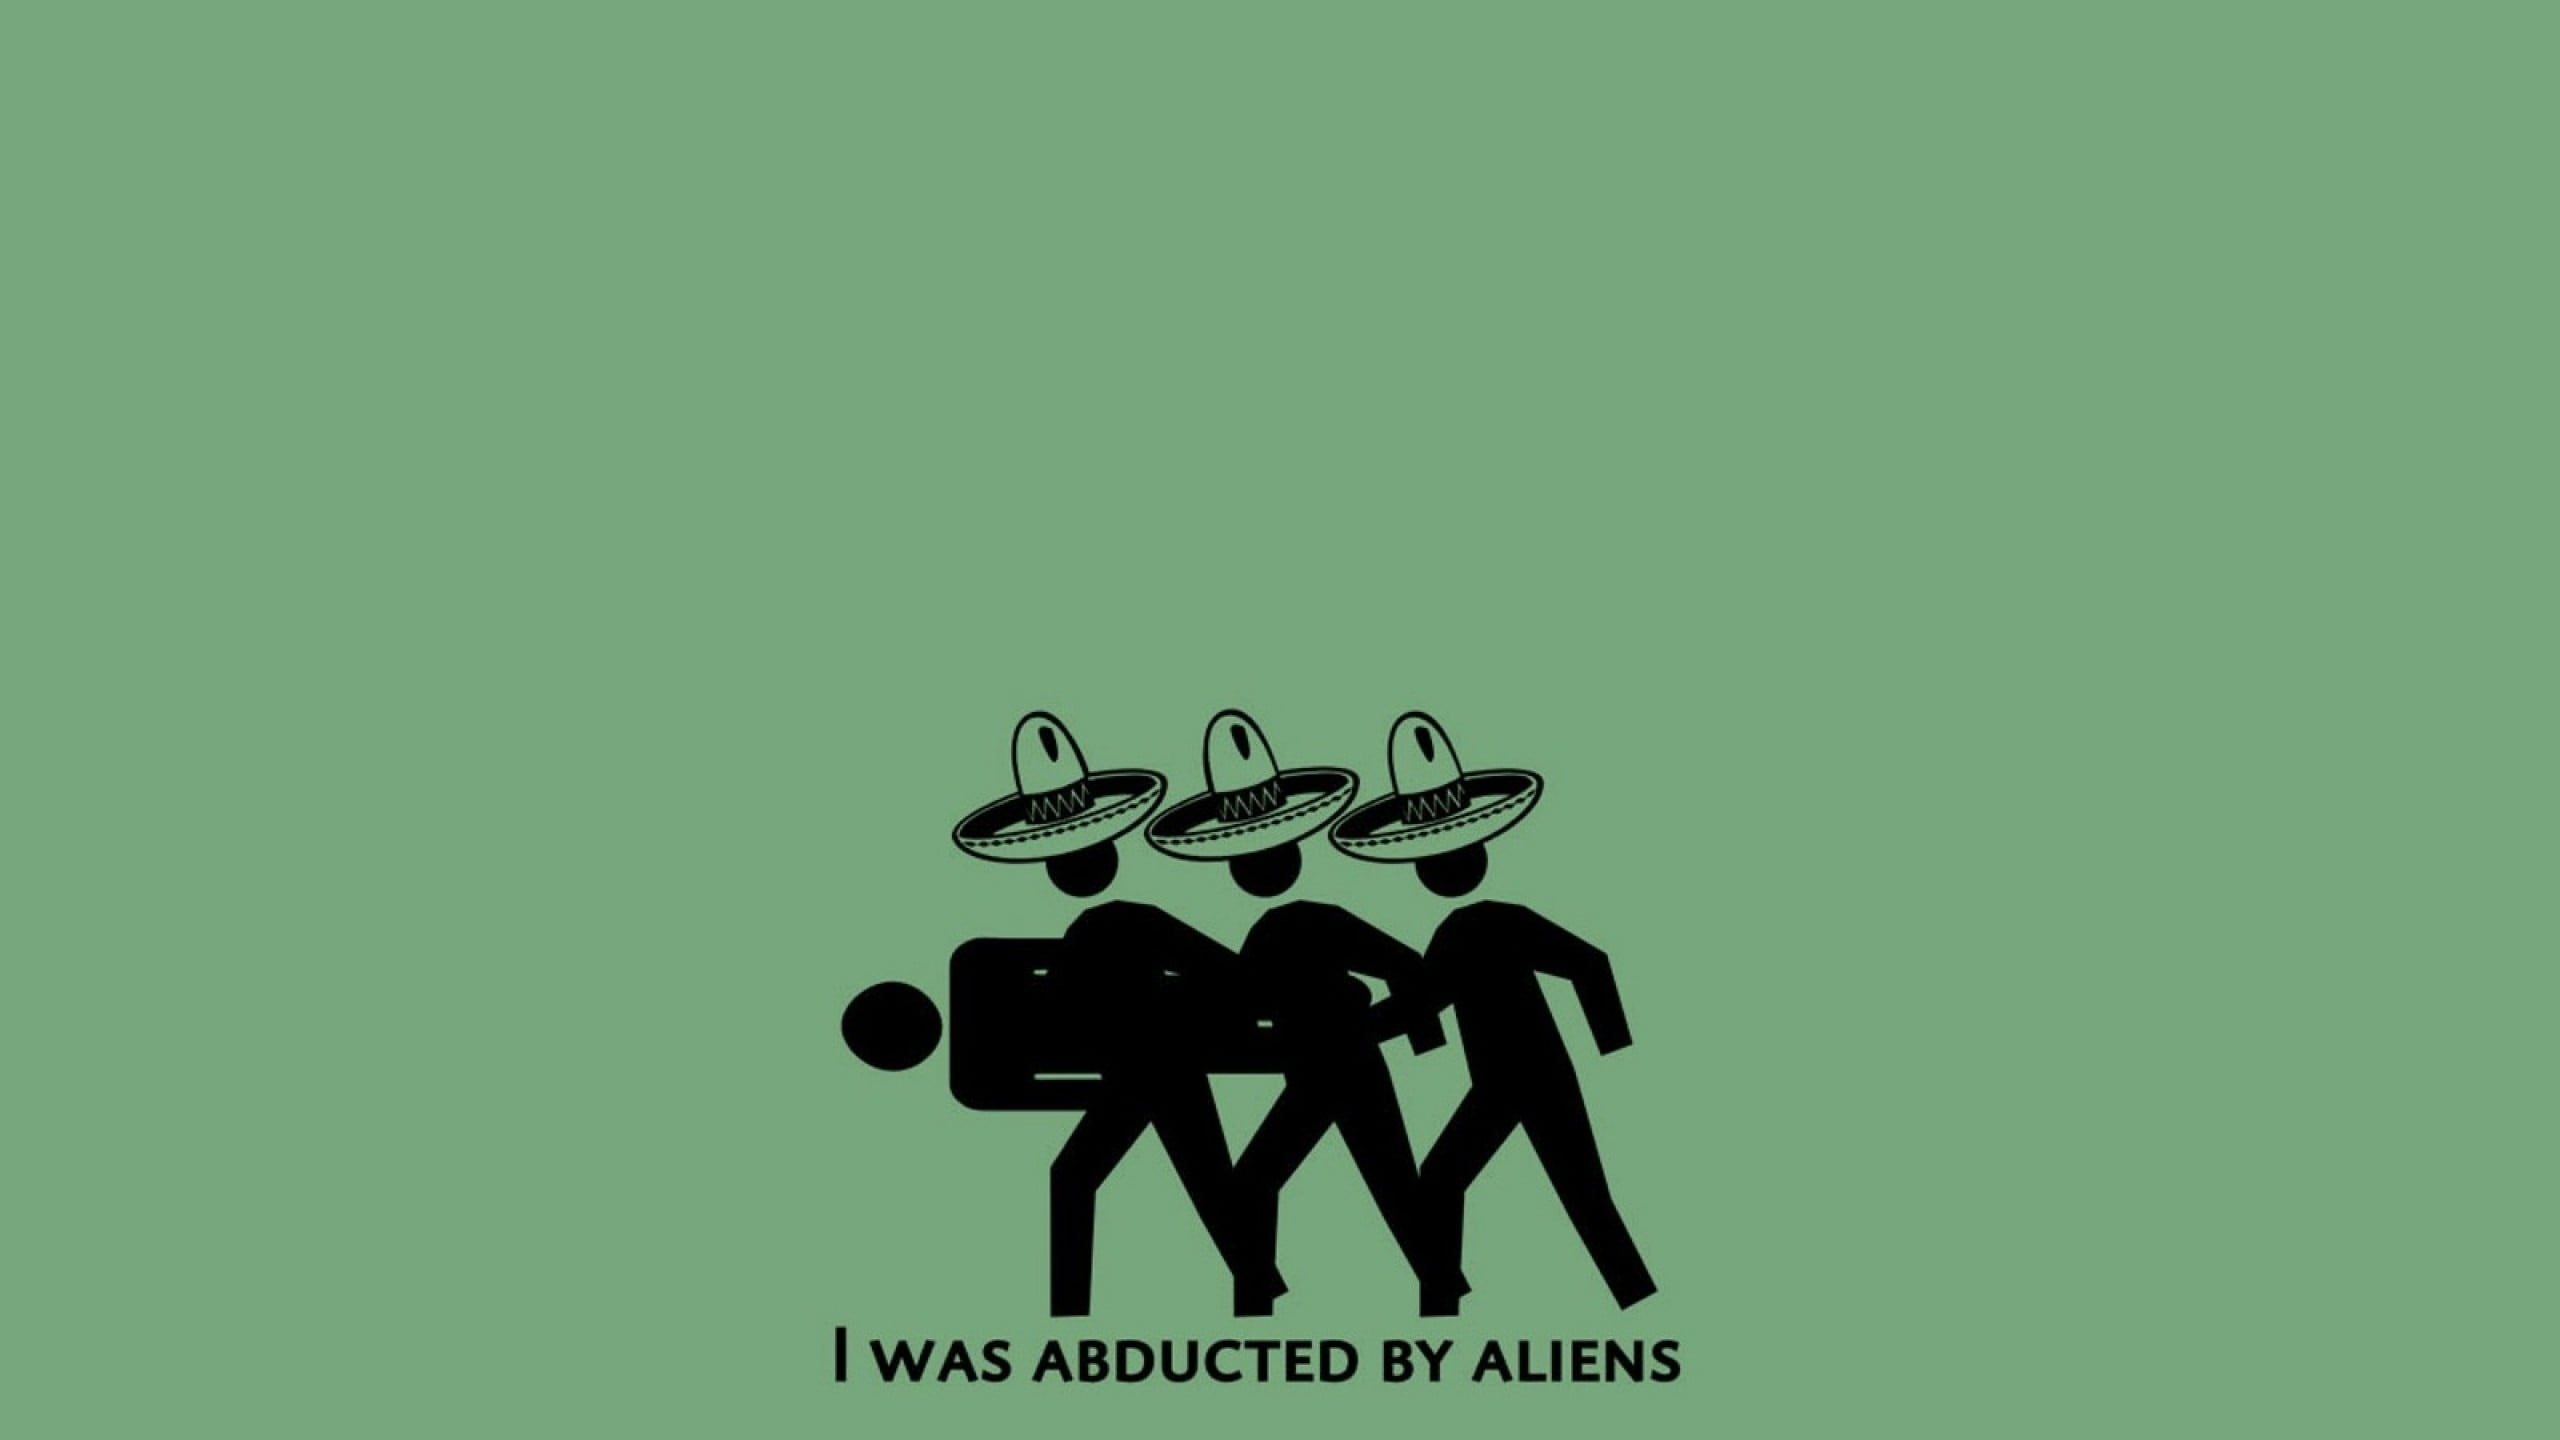 I was abducted by aliens text on green background, humor, minimalism, simple background, artwork